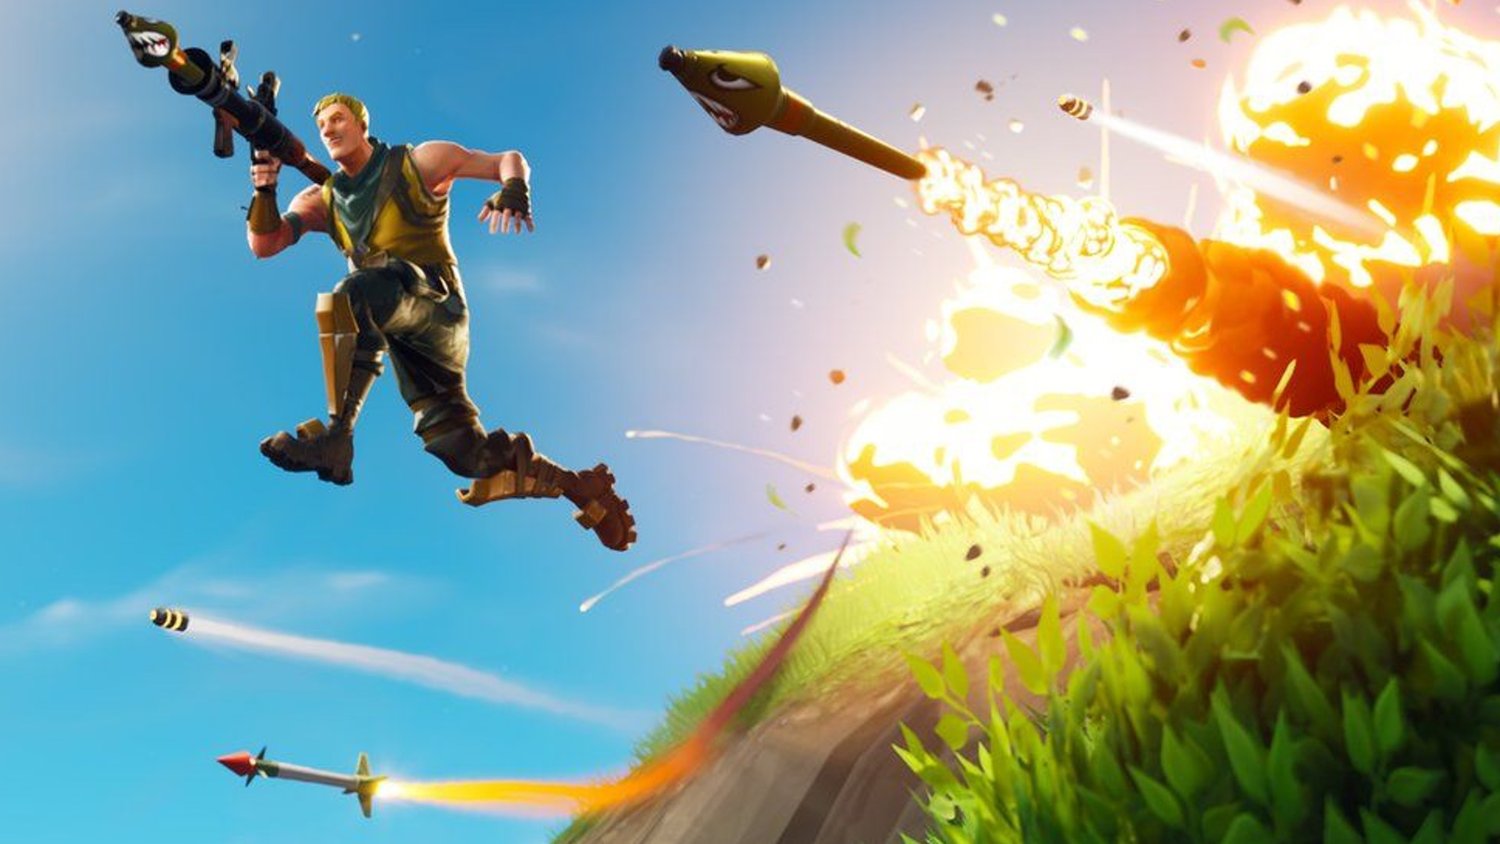 FAST X and INCREDIBLE HULK Director Louis Leterrier Wants to Make a FORTNITE Movie